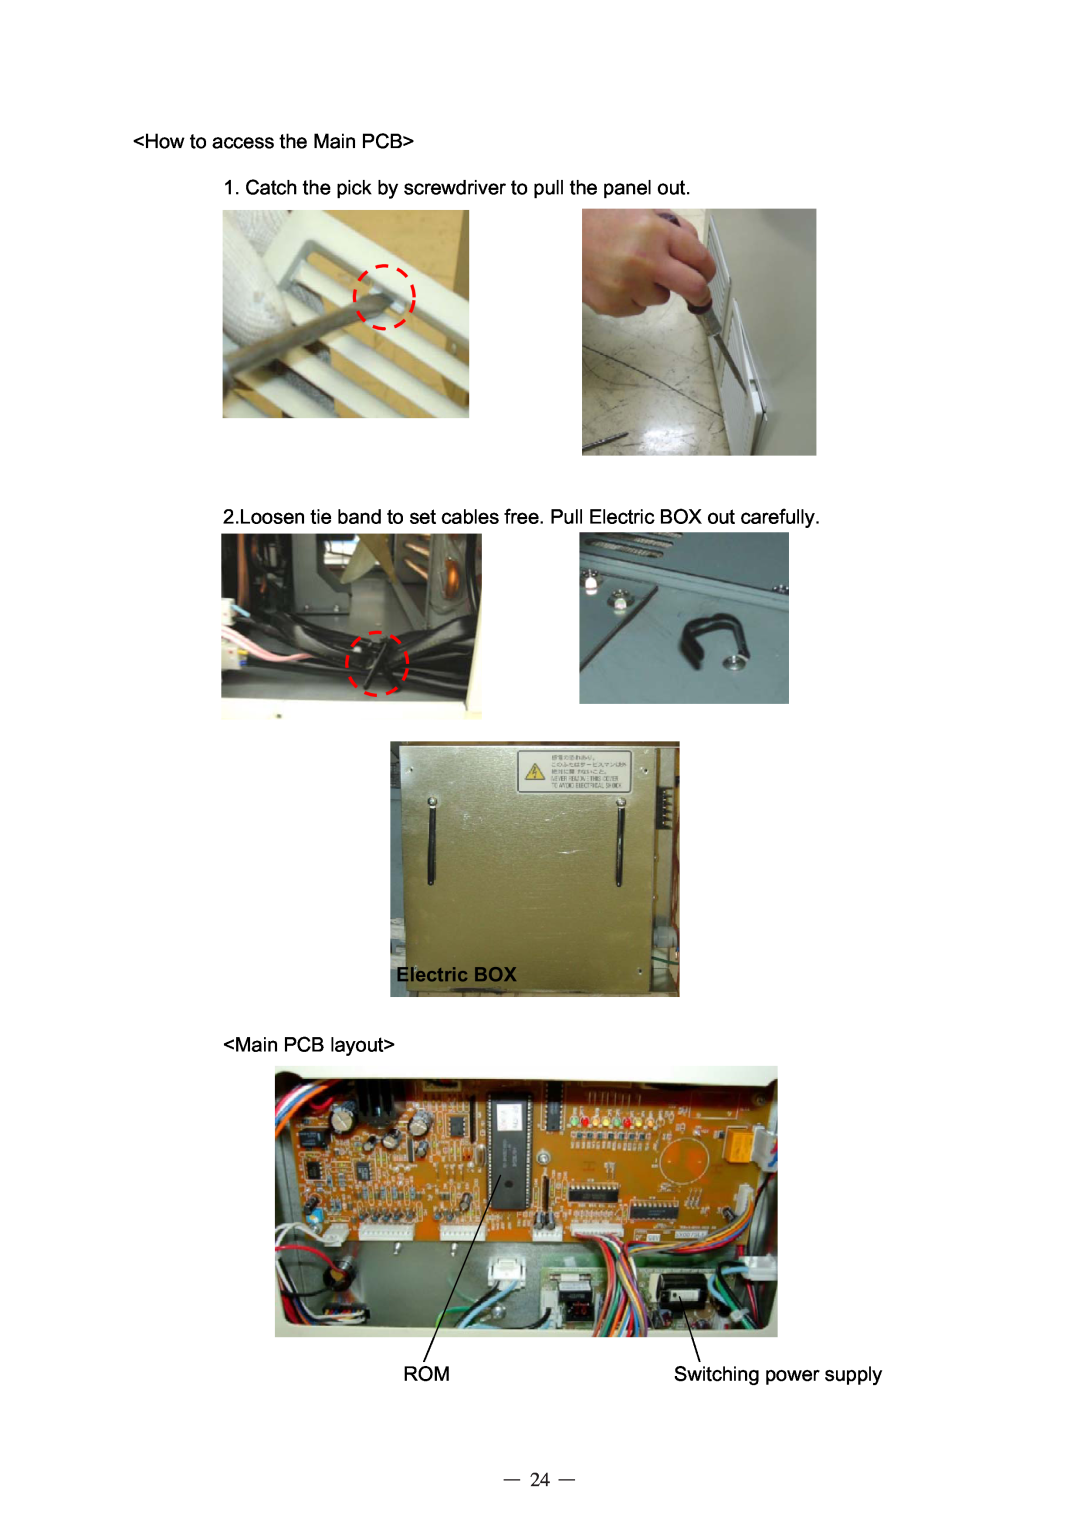 Sanyo MDF-C8V service manual <How to access the Main PCB>, Electric BOX, <Main PCB layout>, Switching power supply 